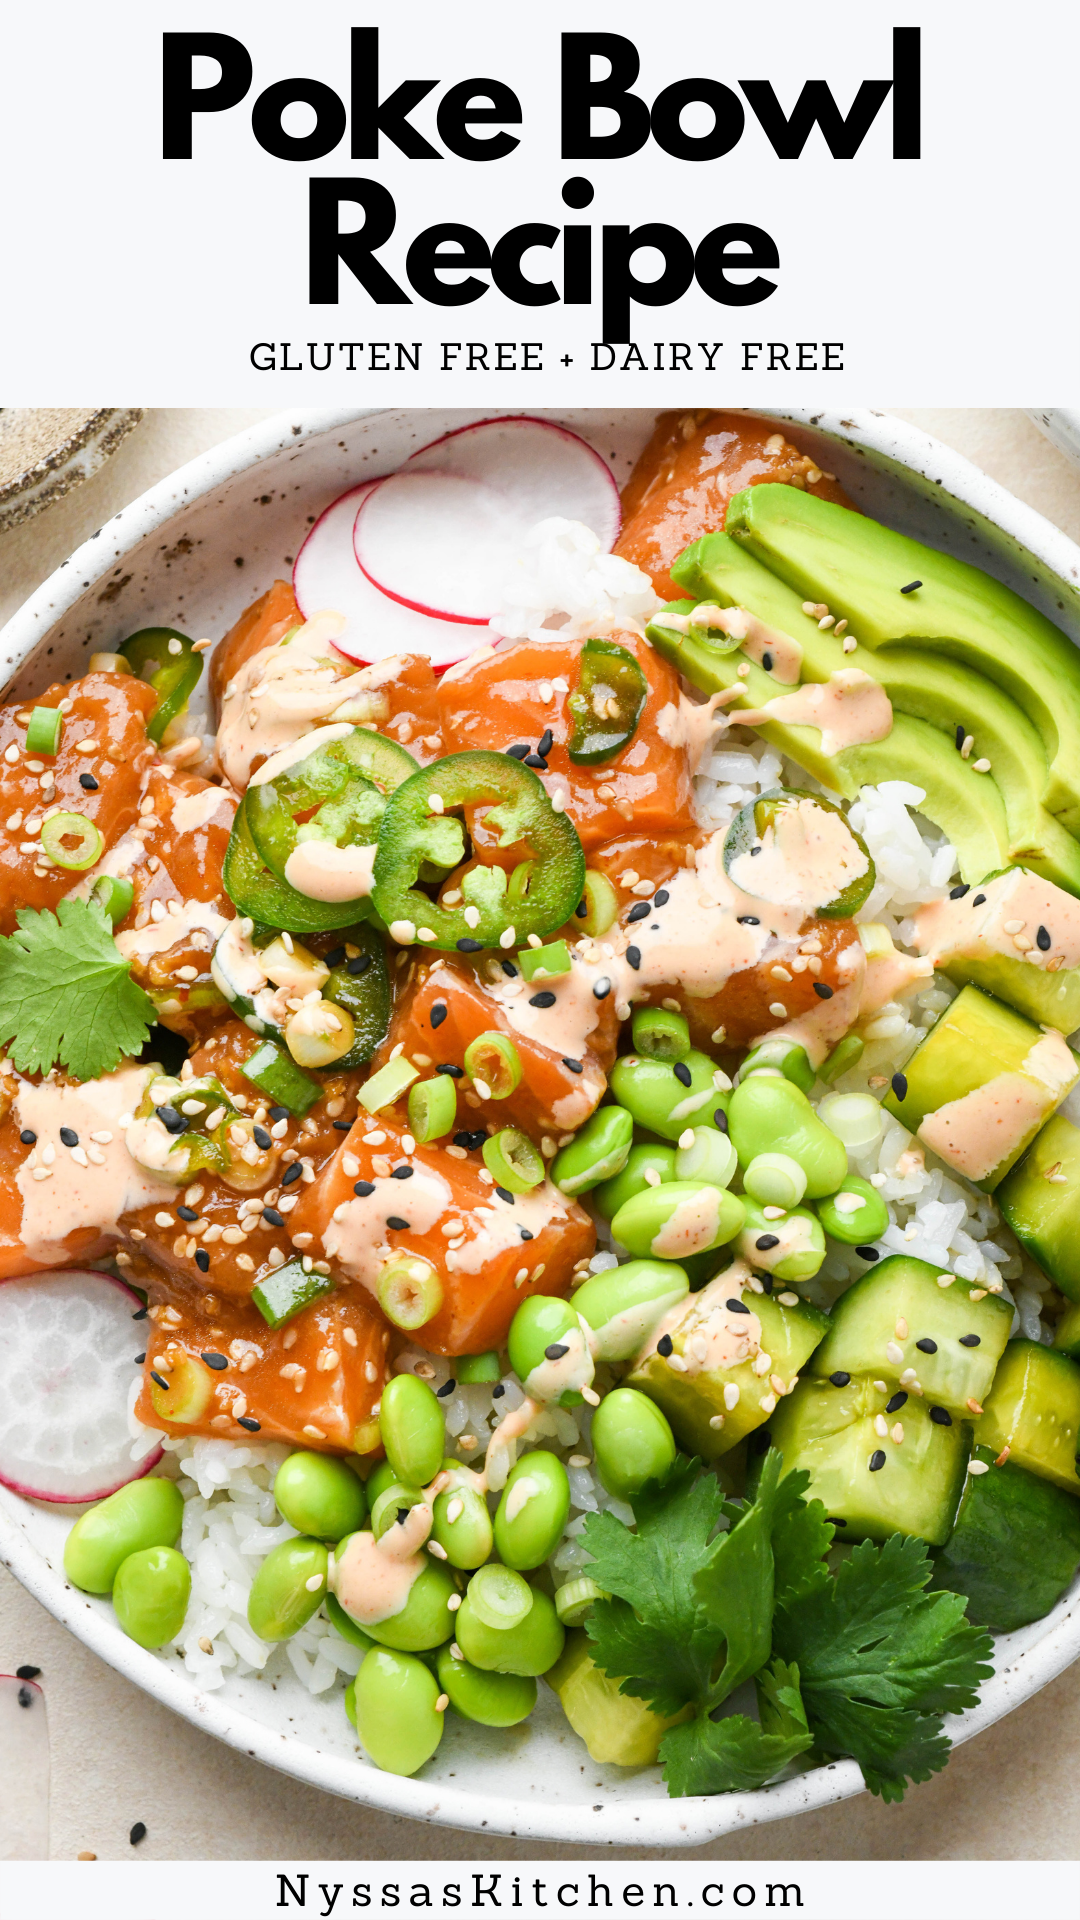 A poke bowl recipe that's flavorful and easy to make at home! Made with sushi grade salmon (or tuna) marinated in a simple sauce of coconut aminos, sesame oil, and rice vinegar. Served over rice with lots of delicious toppings and a simple spicy mayo. Easy to personalize and the best fresh lunch or dinner. Makes 2 poke bowls, but recipe can easily be doubled. Gluten free, dairy free, Whole30 / paleo option.